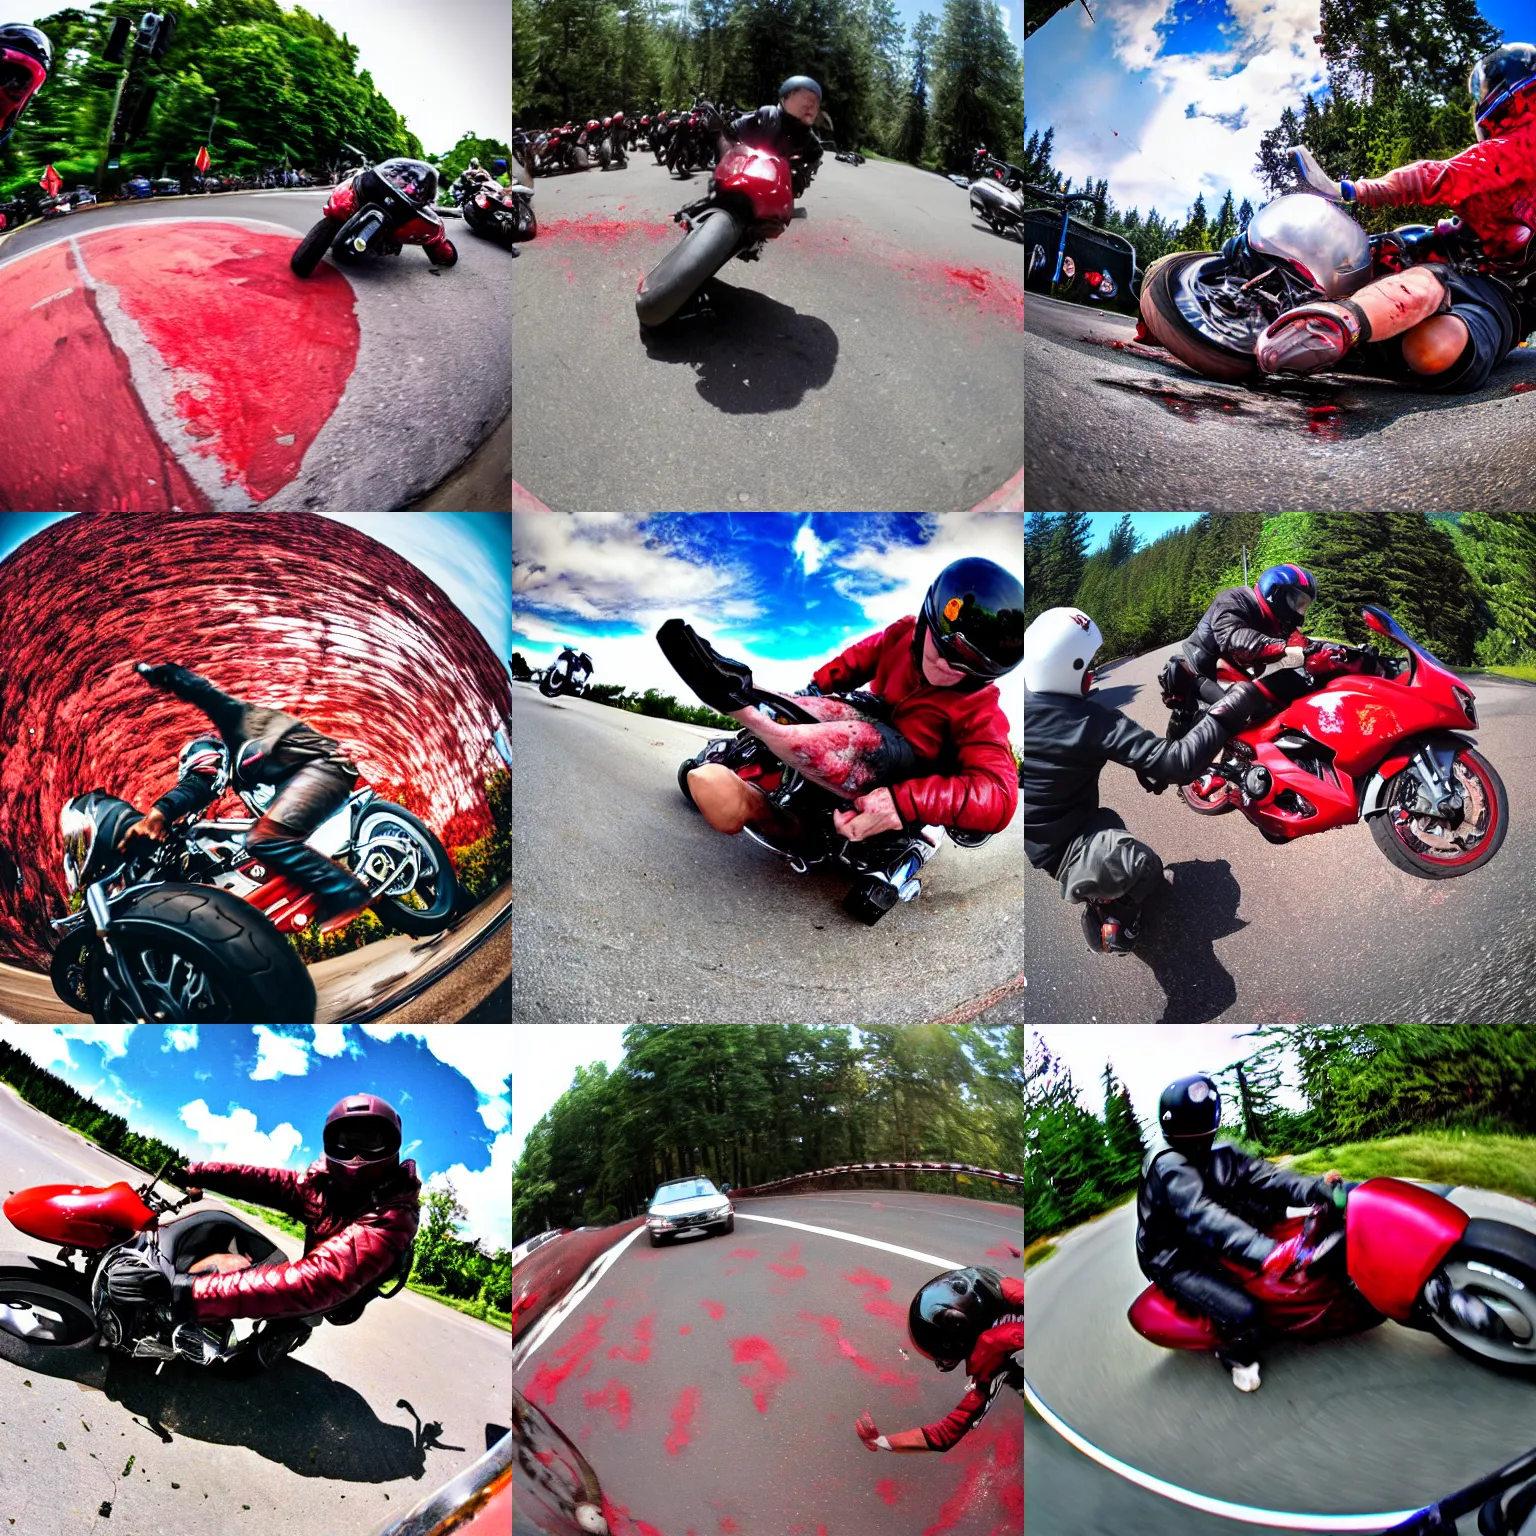 Prompt: fisheye lens photo of getting mangled by a motorcycle, blood and bone, red meat shreds